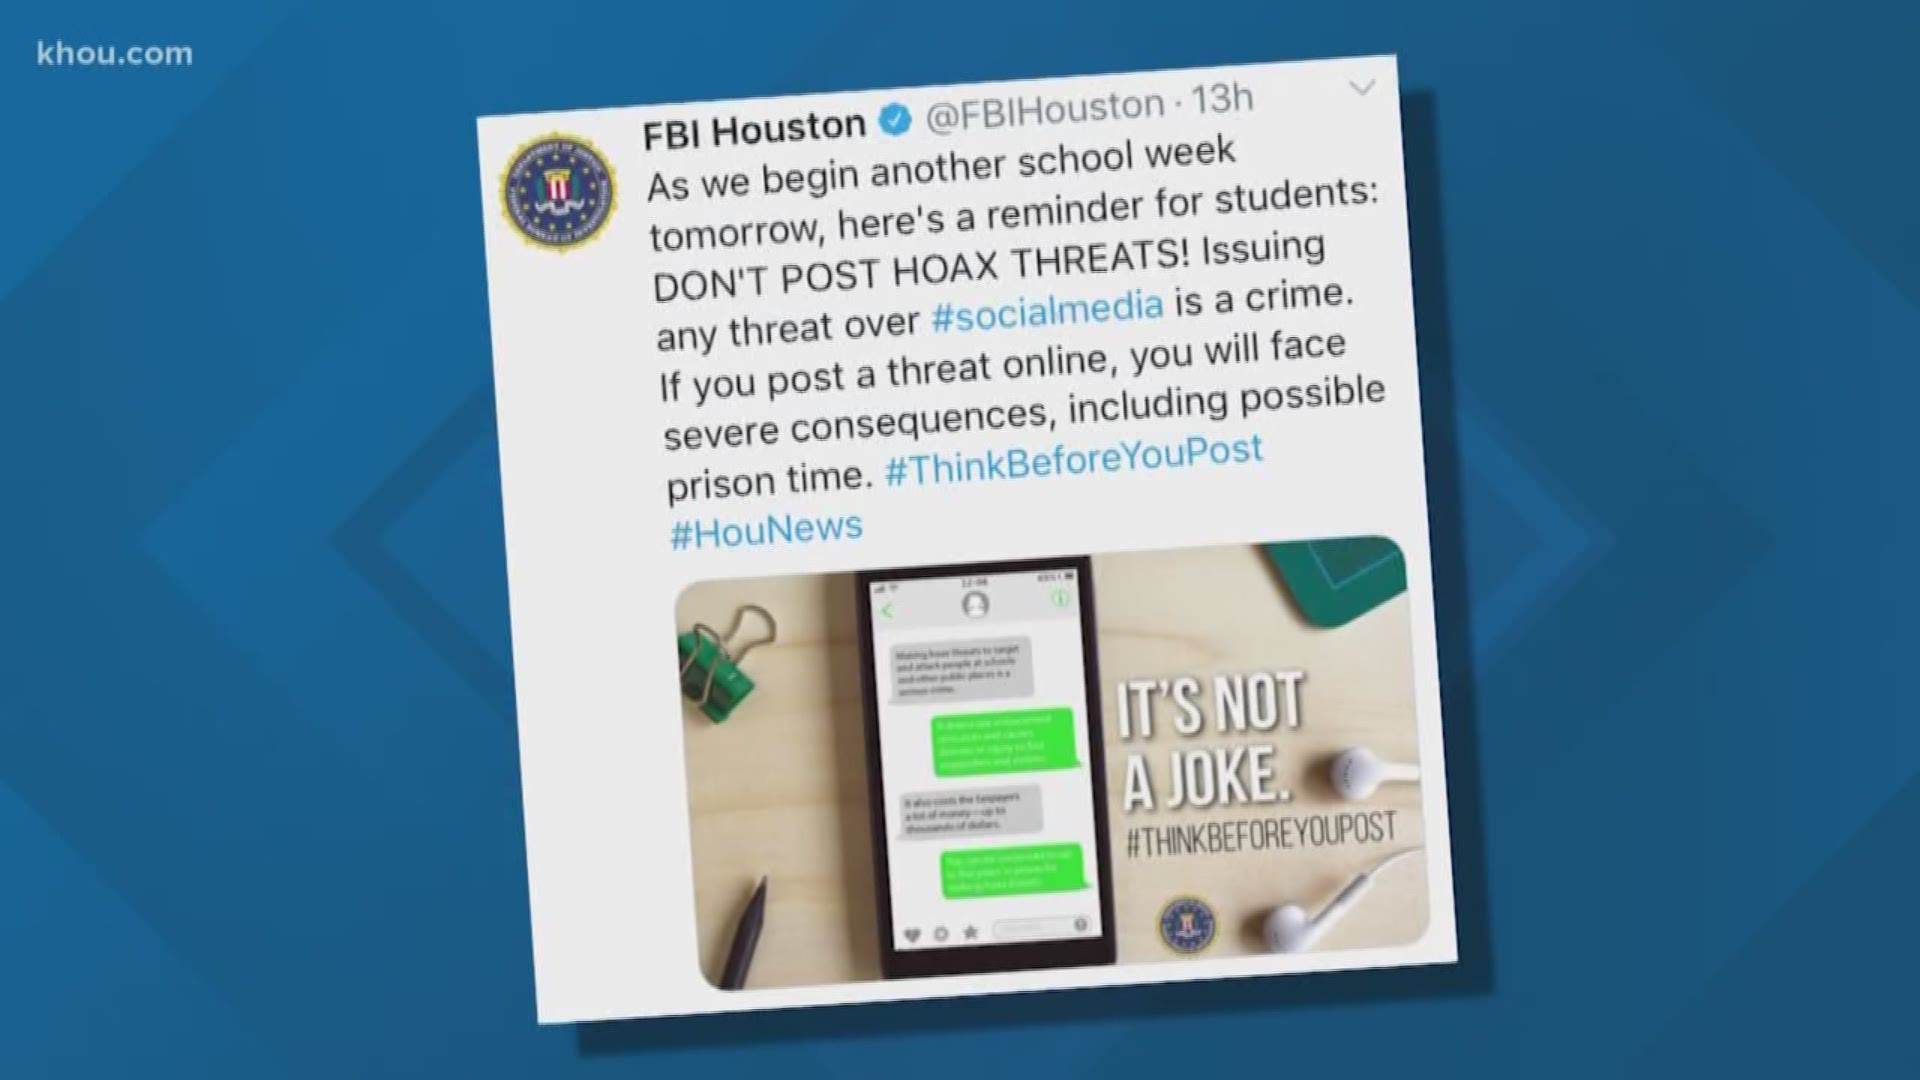 FBI Houston took to Twitter this weekend to remind students to think before they post anything to social media.